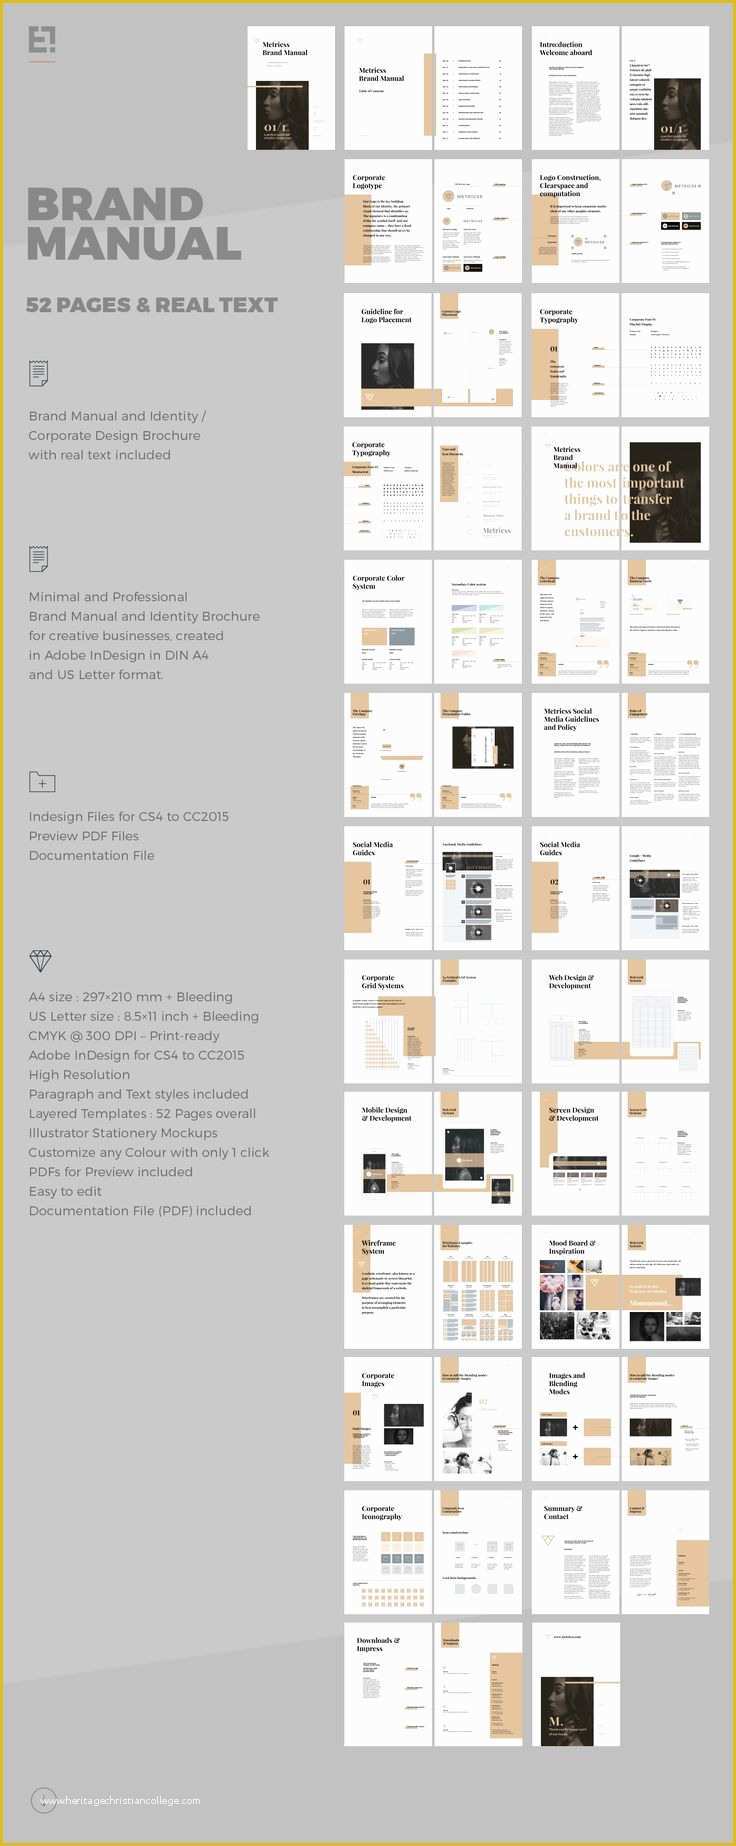 Brand Guidelines Template Indesign Free Of Brand Manual and Identity Template – Corporate Design